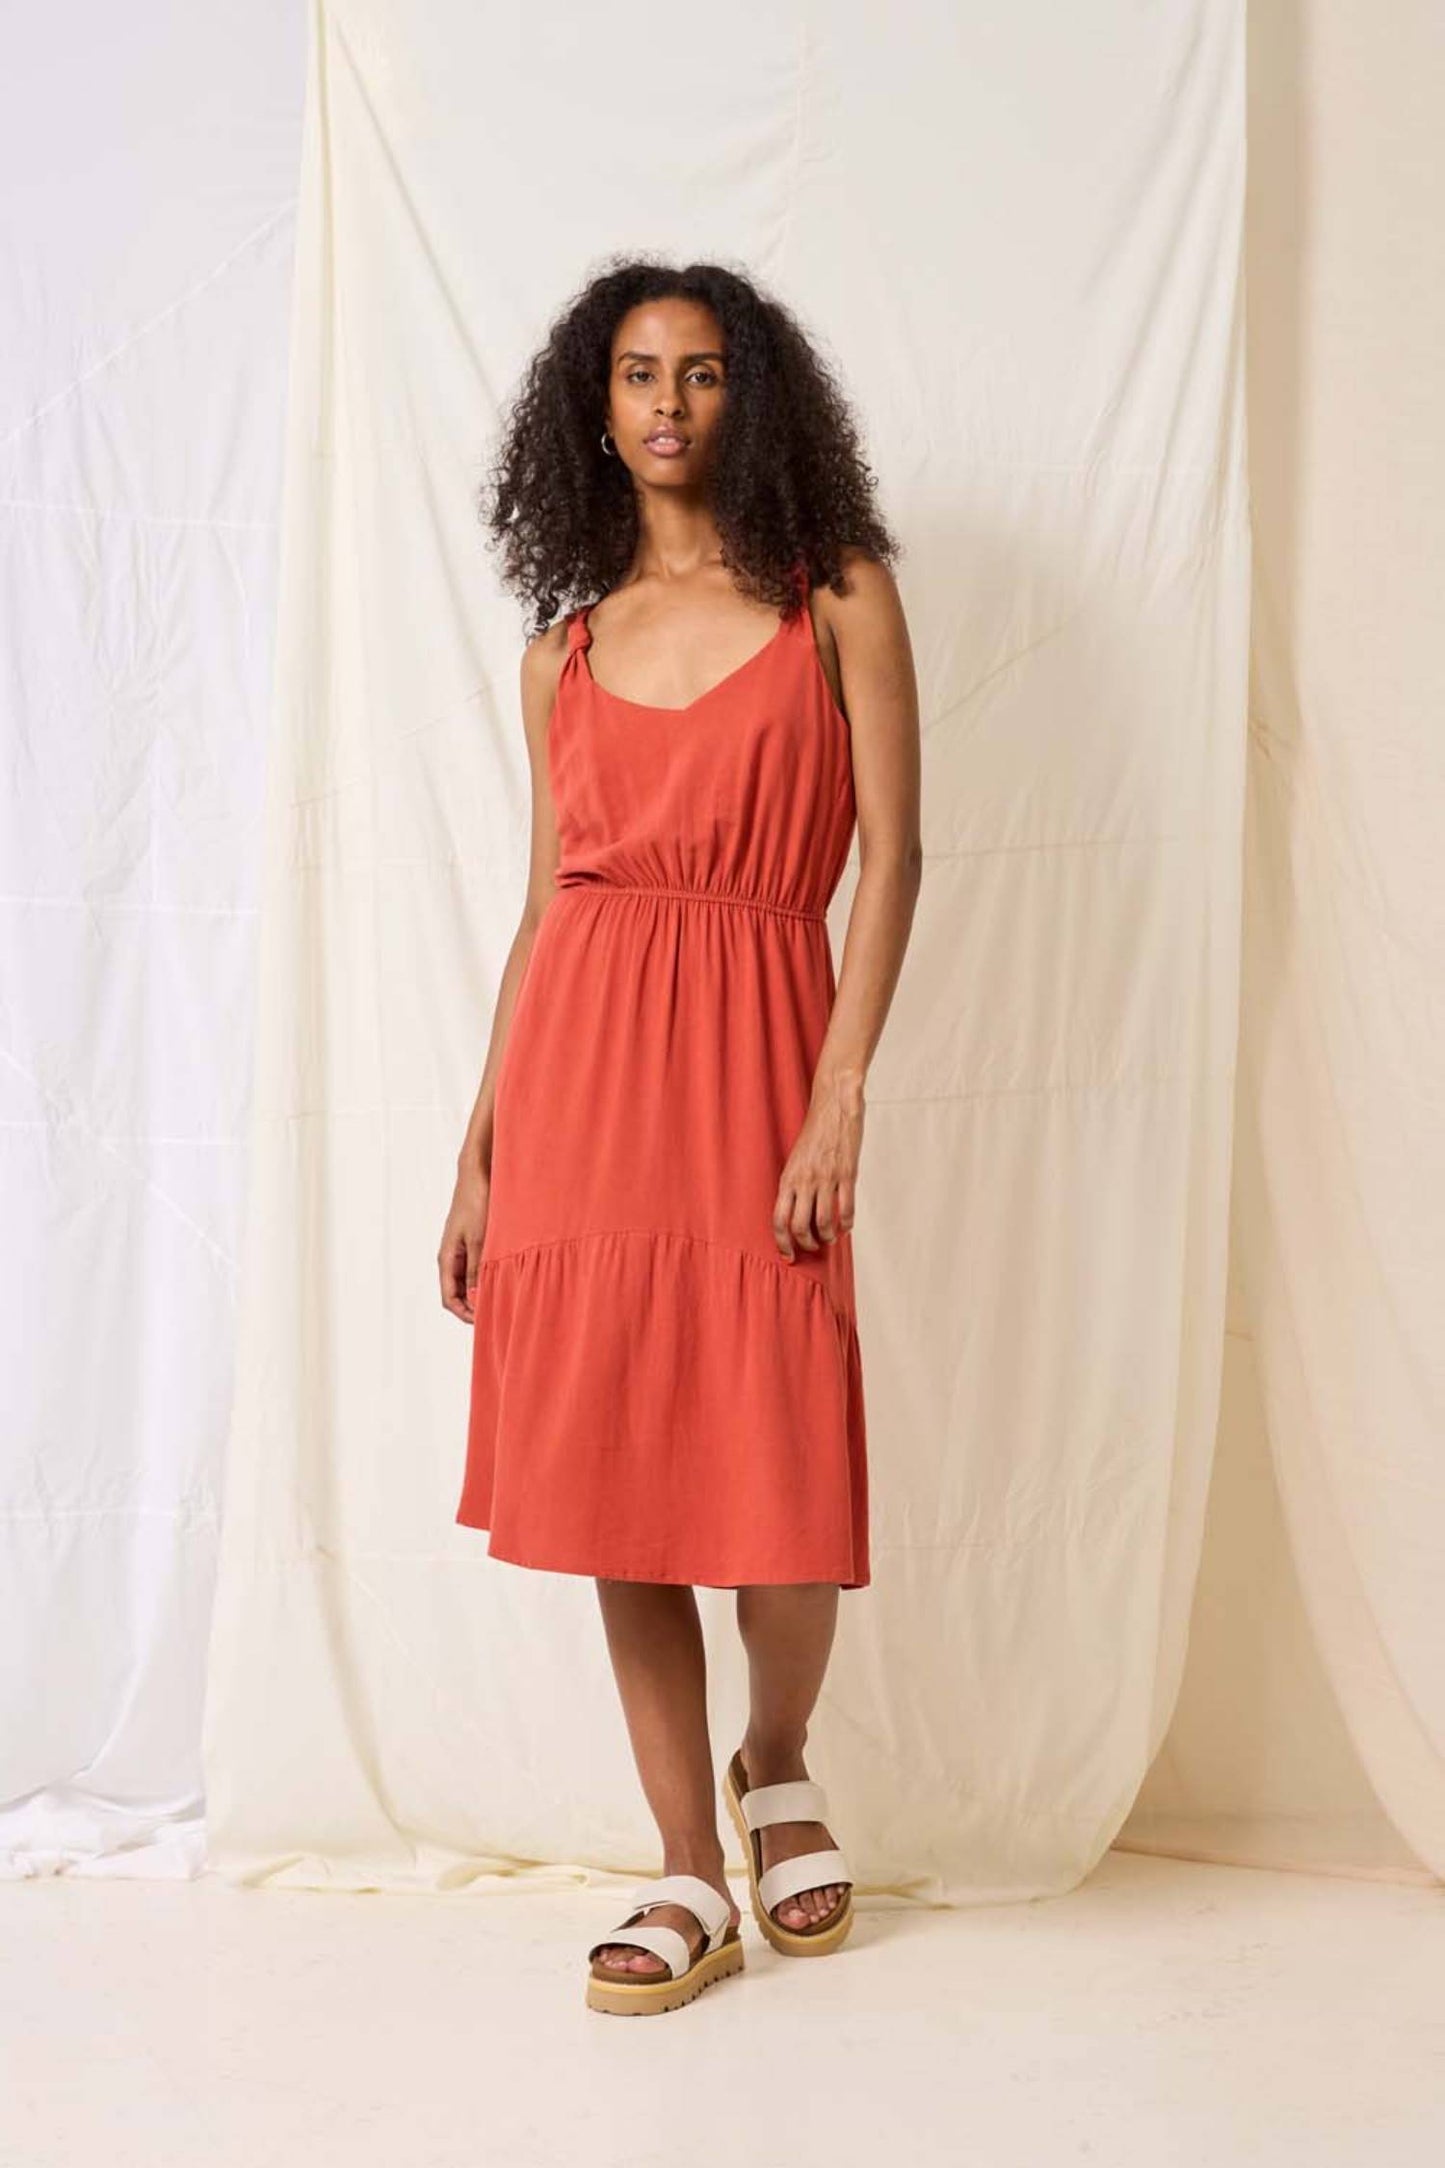 Rubia Dress by Cokluch, Chili, tank dress, knotted straps, rounded V-neck, elastic waist, midi-length, ruffled hem, viscose/linen, sizes XS to XL, made in Montreal